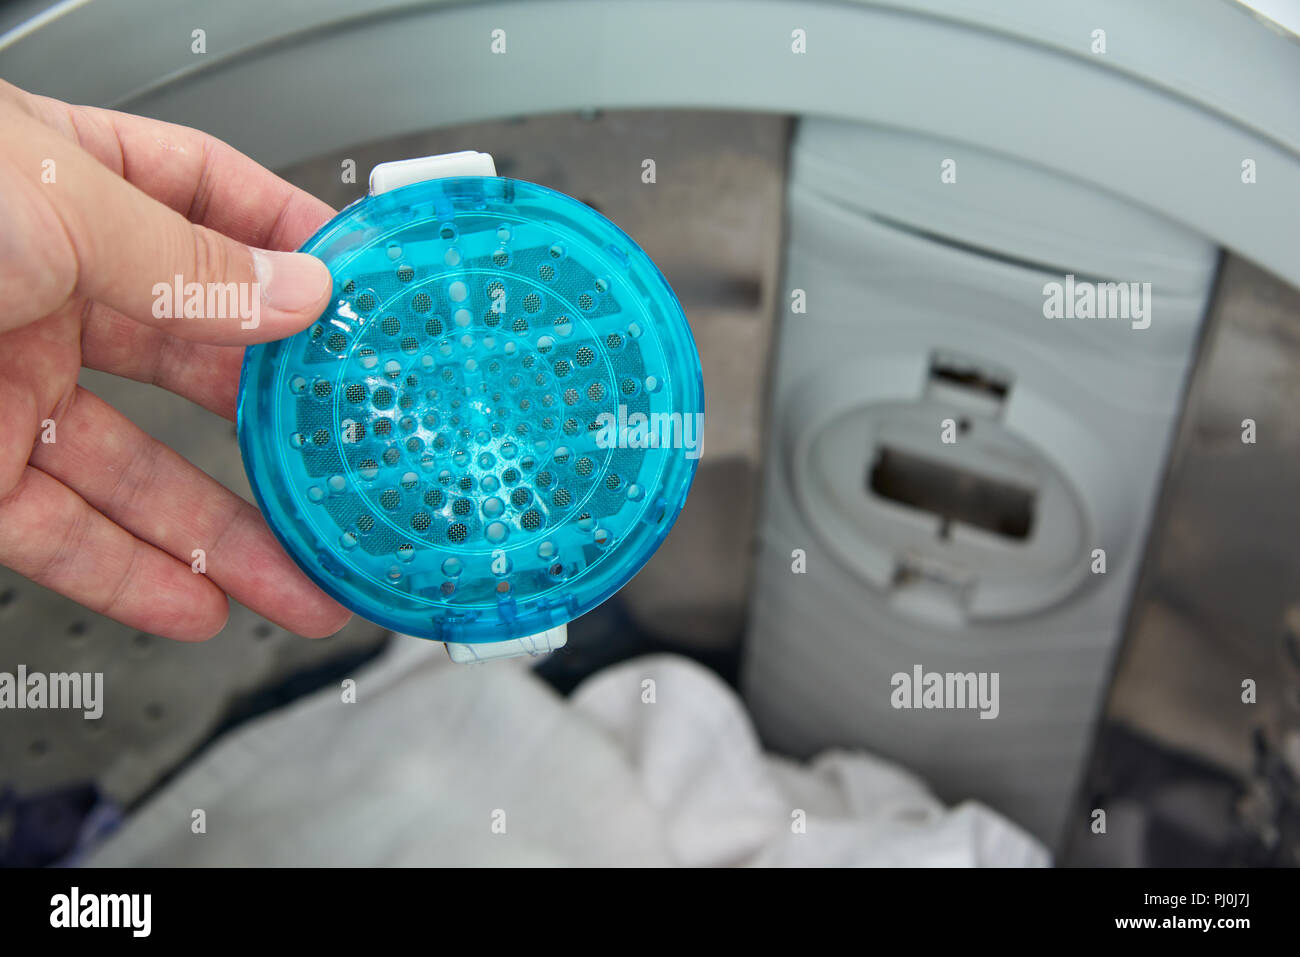 https://c8.alamy.com/comp/PJ0J7J/filter-for-filtering-out-dust-from-washing-in-a-top-load-washer-machine-PJ0J7J.jpg